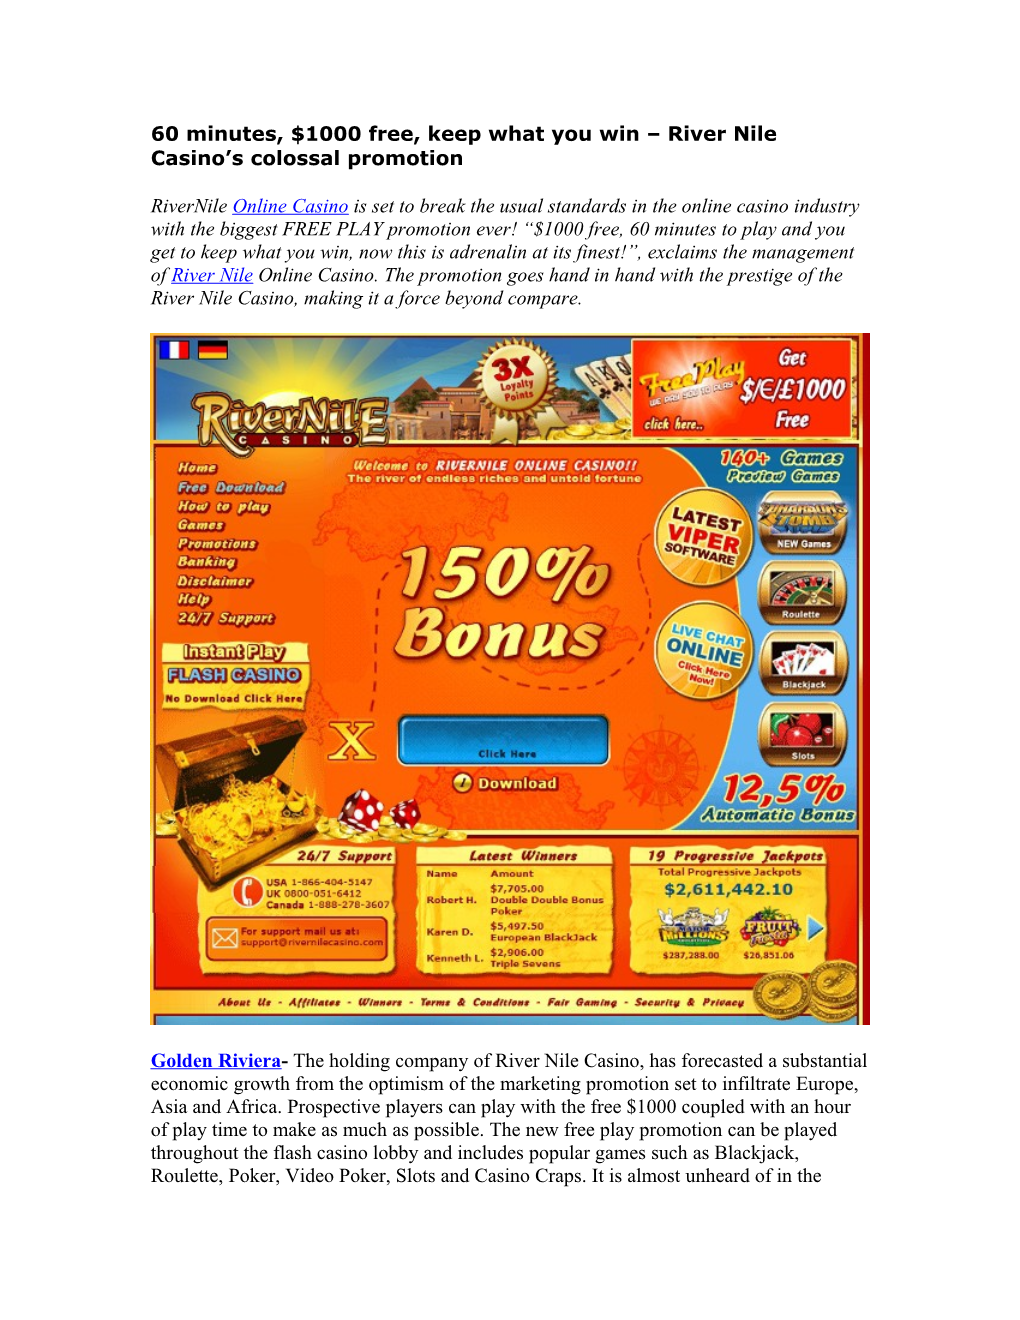 60 Minutes, $1000 Free, Keep What You Win River Nile Casino S Colossal Promotion